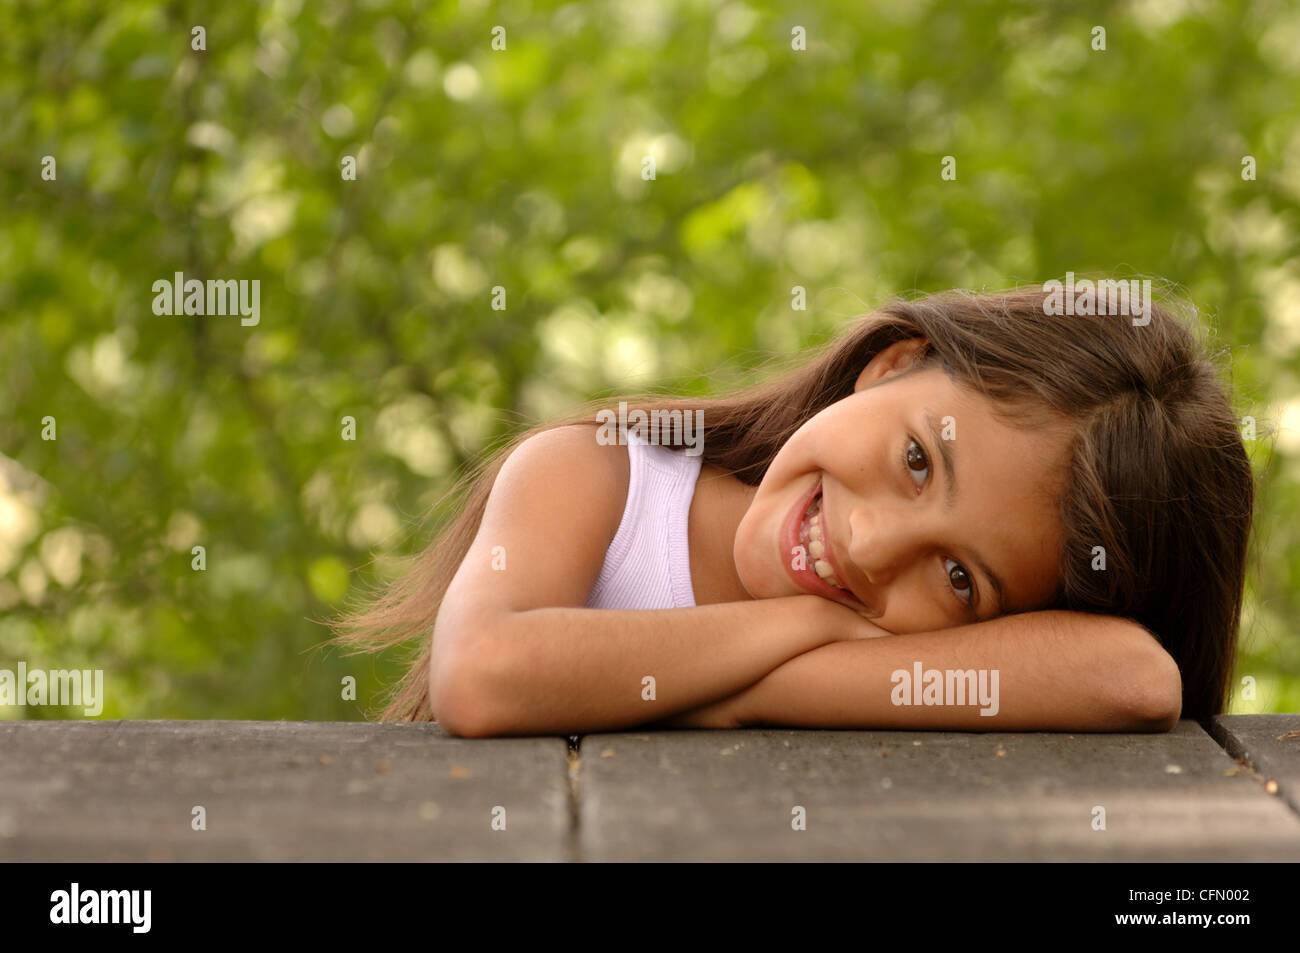 Young Girl Leaning on Wall Stock Photo